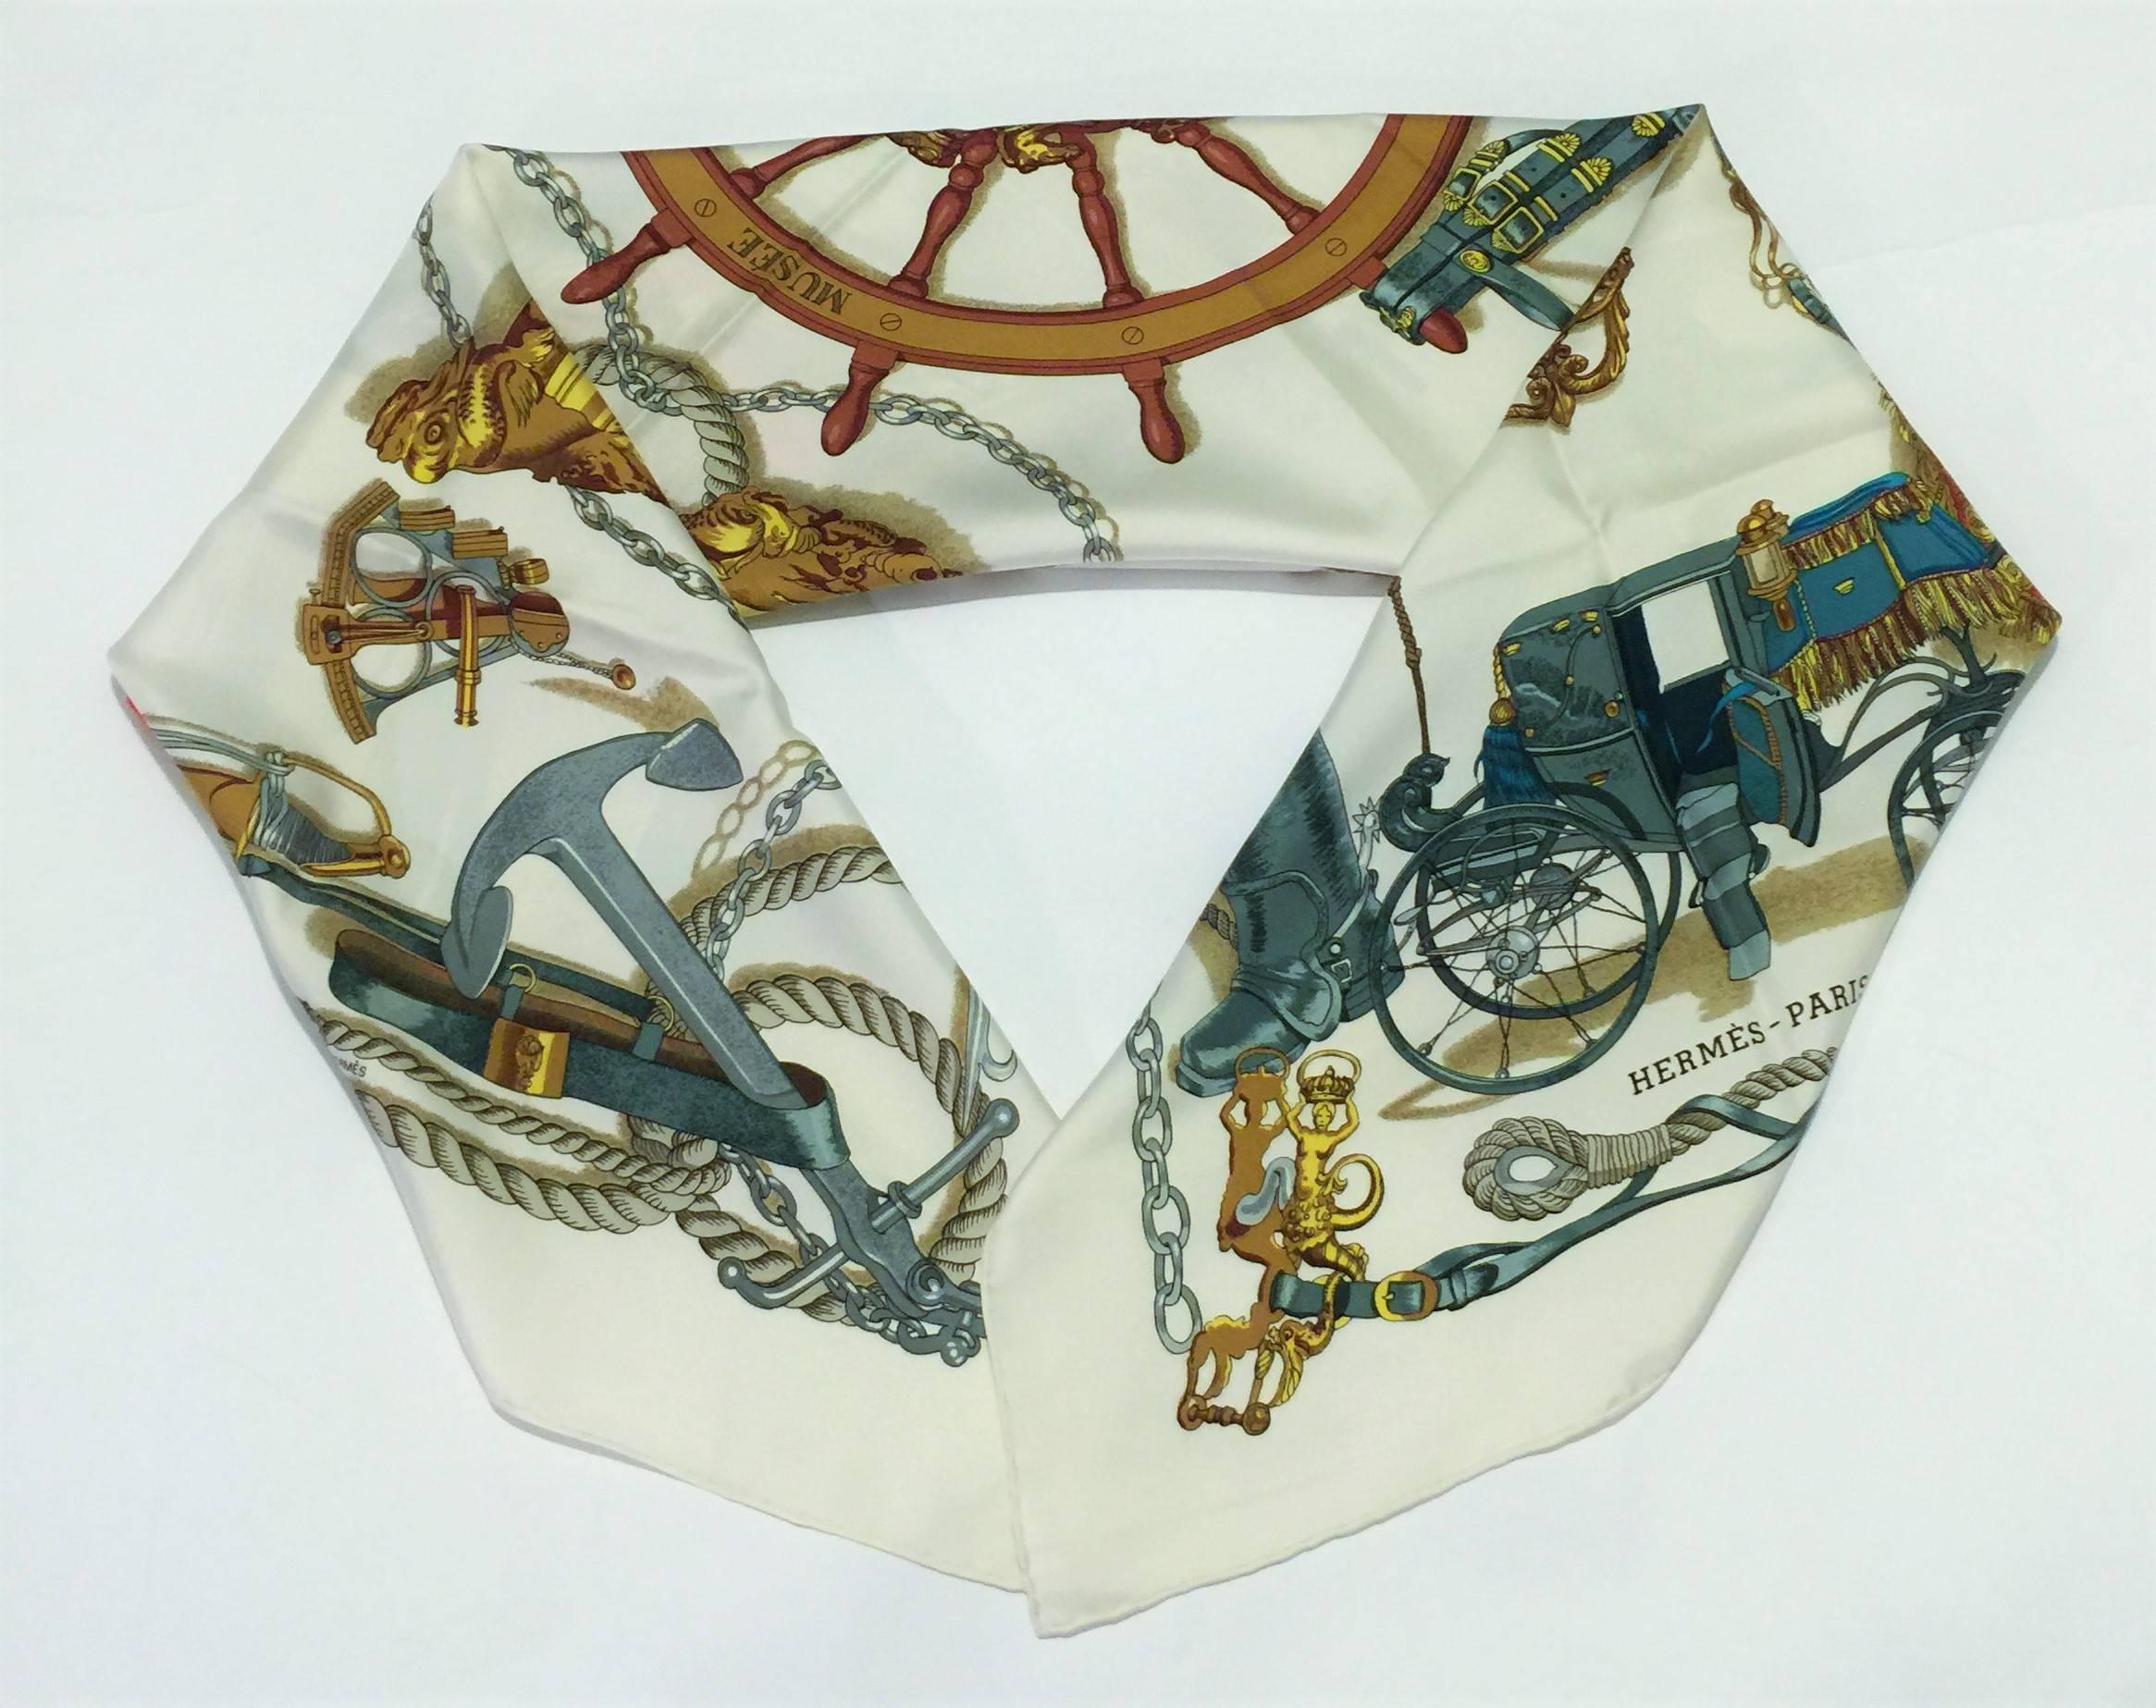 Hermes Paris Vintage Authentic Hermes ‘Musee’ a Classical Hermes 100% Silk Twill Scarf by Philippe Ledoux.  Designed in 1962 and re-issued in 1992 and 1997.  Dimensions are 90cm square.  Hand Rolled Hems.  Colors White, Red, Gold, Brown, Green;